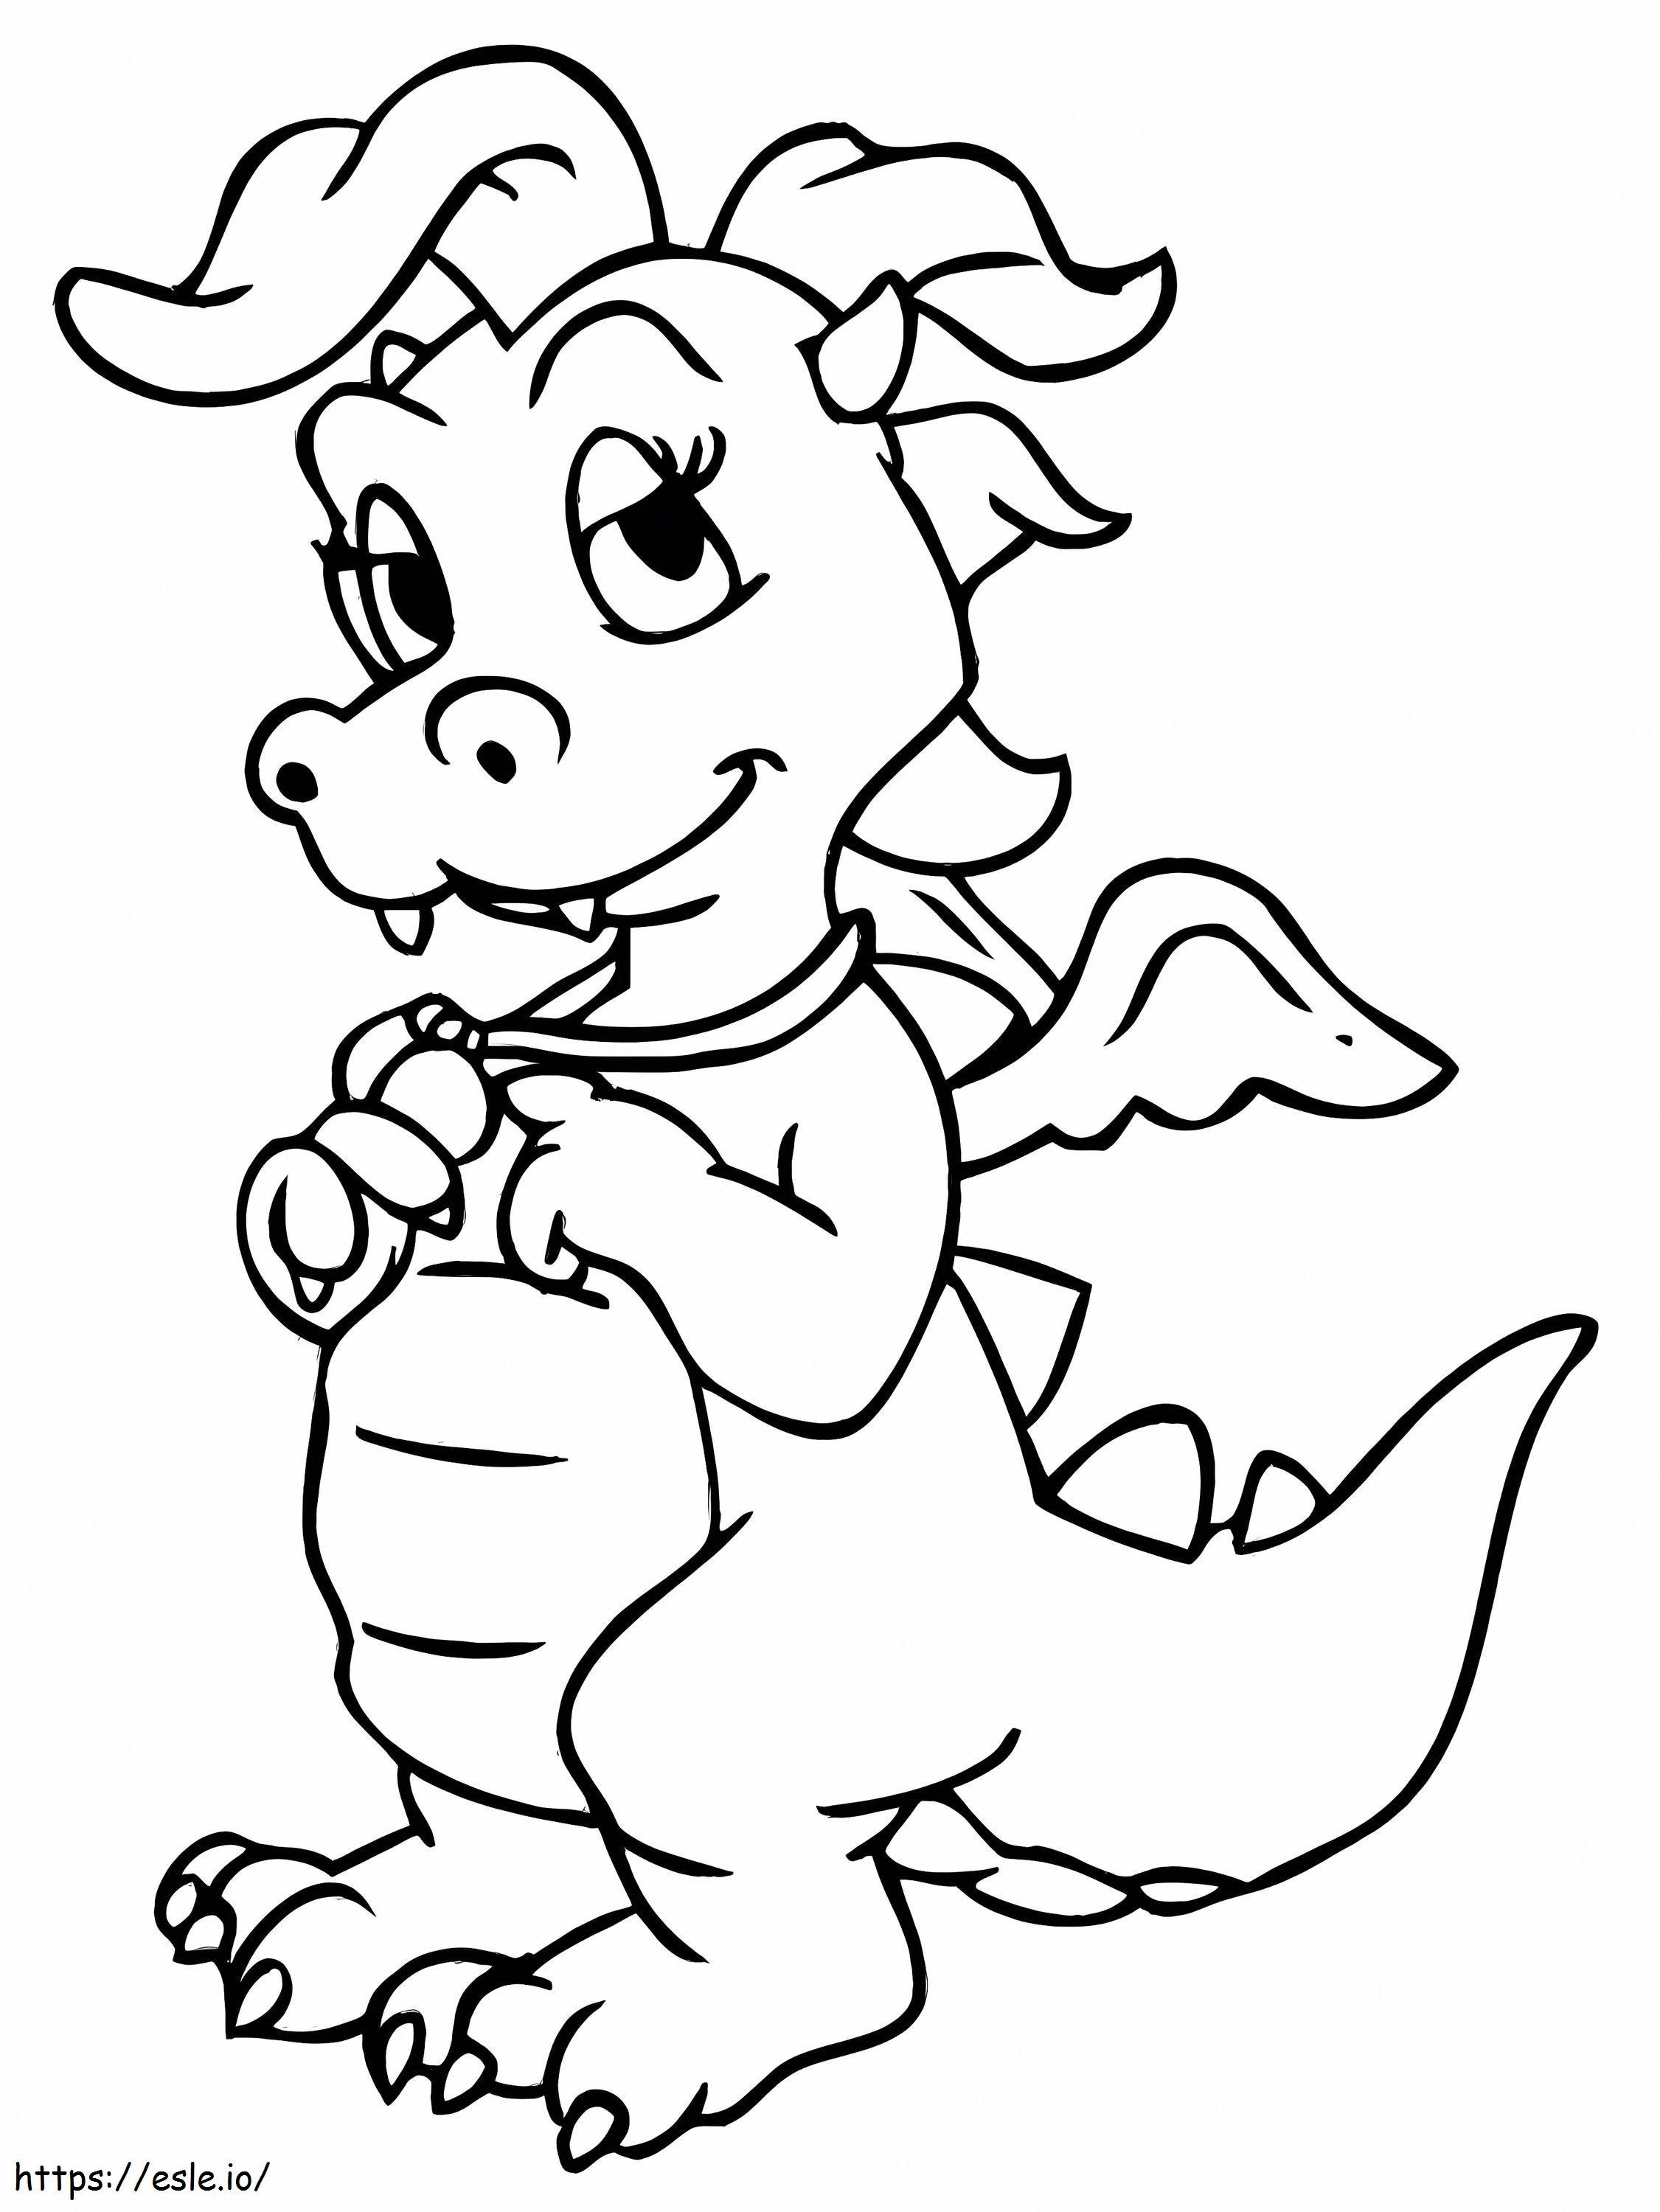 Cassie coloring page